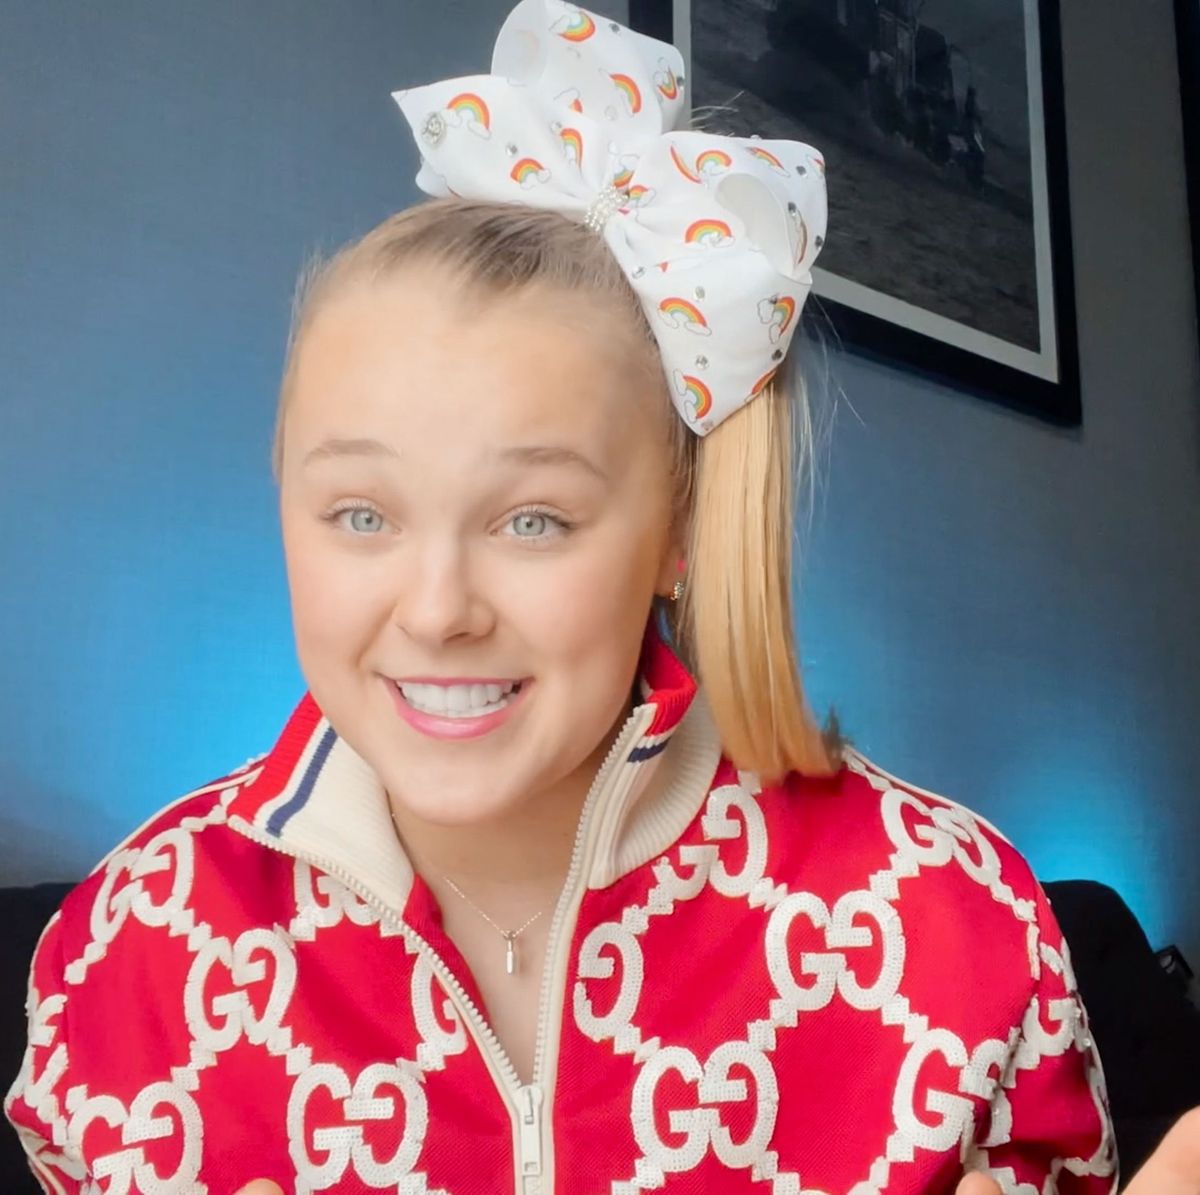 https://hips.hearstapps.com/hmg-prod/images/in-this-screengrab-released-on-april-8-jojo-siwa-speaks-news-photo-1622566241.jpg?crop=0.565xw:1.00xh;0.199xw,0&resize=1200:*